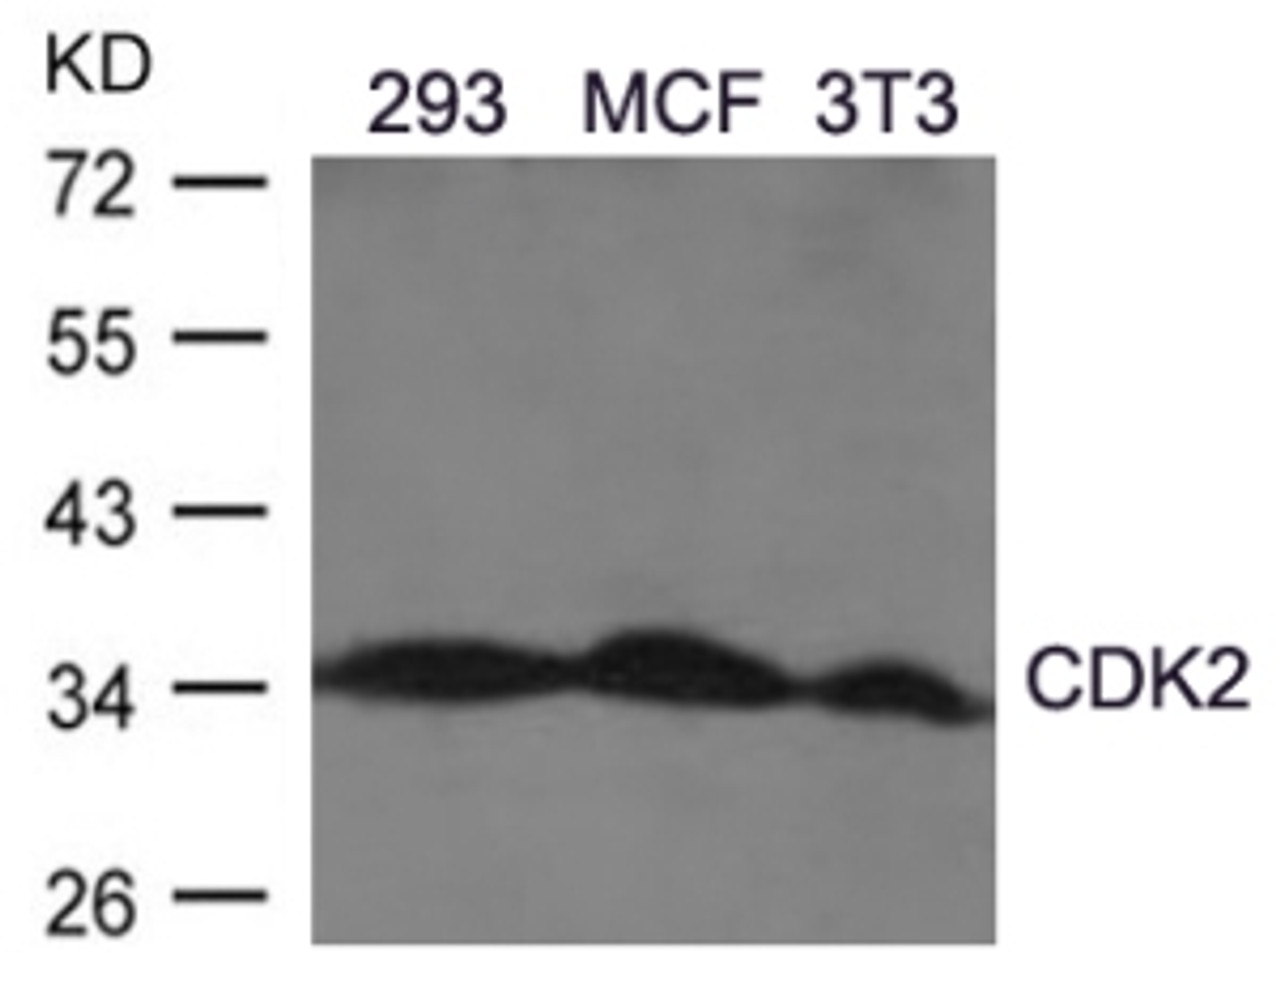 Western blot analysis of lysed extracts from A2780 cells using CDK2 (Ab-160) .